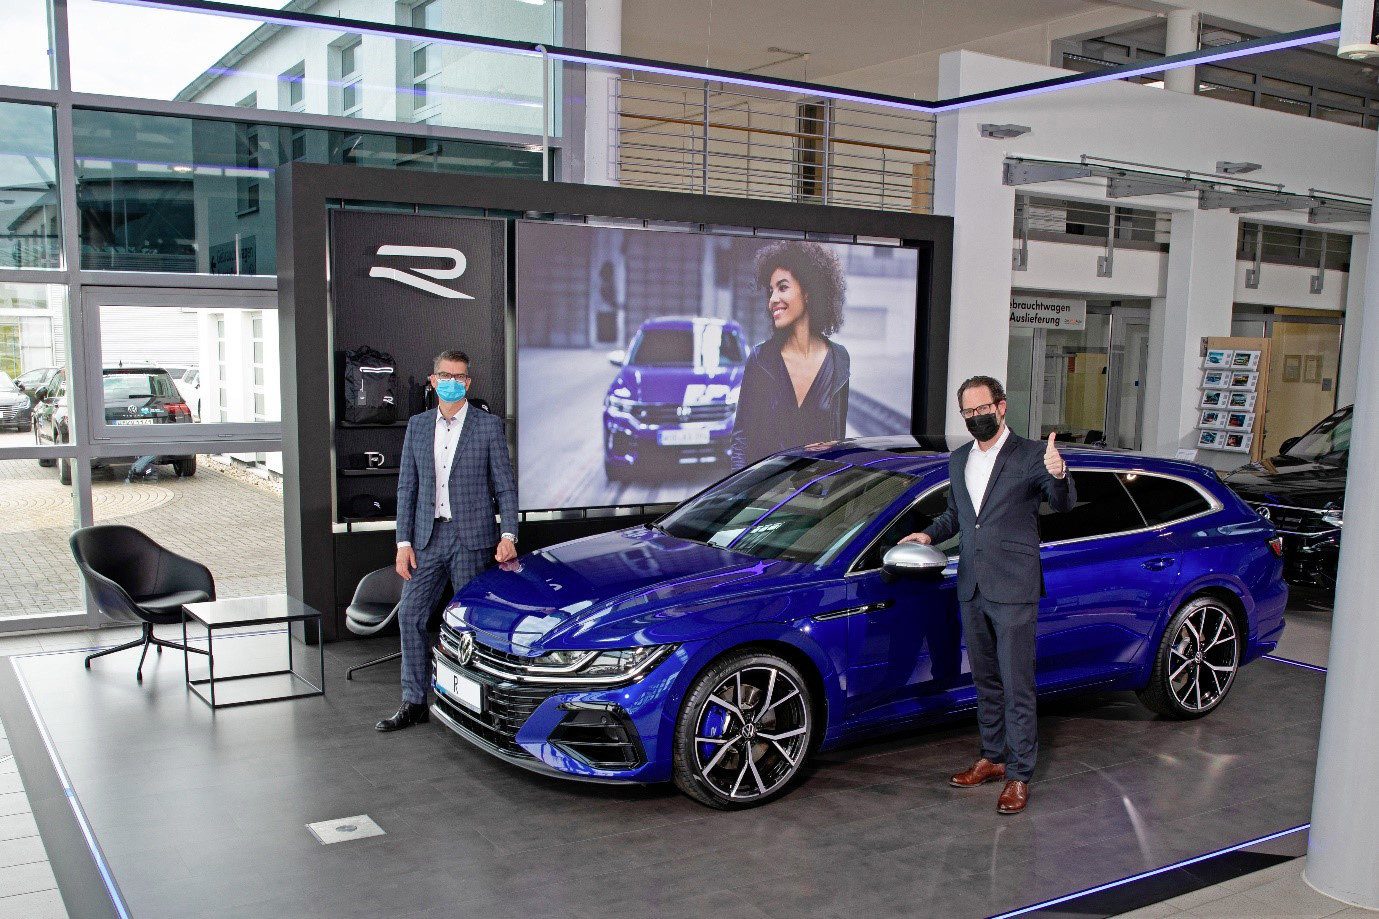 Volkswagen's new R showcase in Hannover, Germany